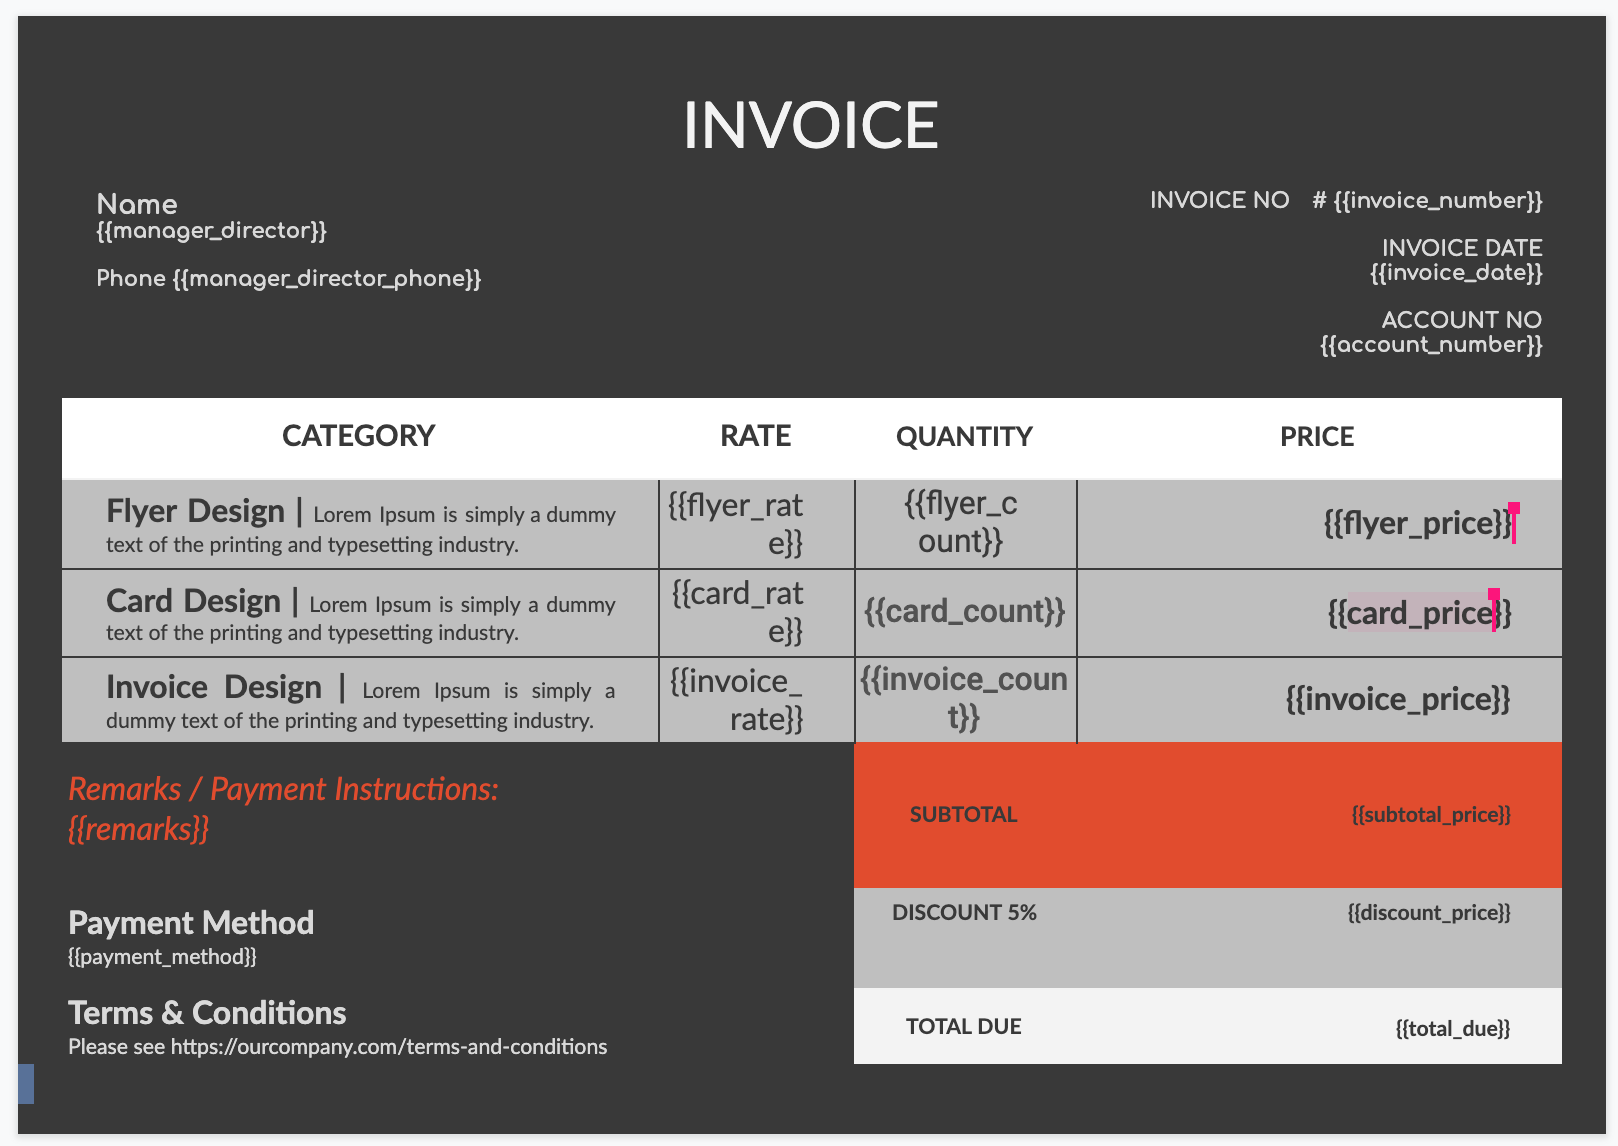 Invoice with templated variables